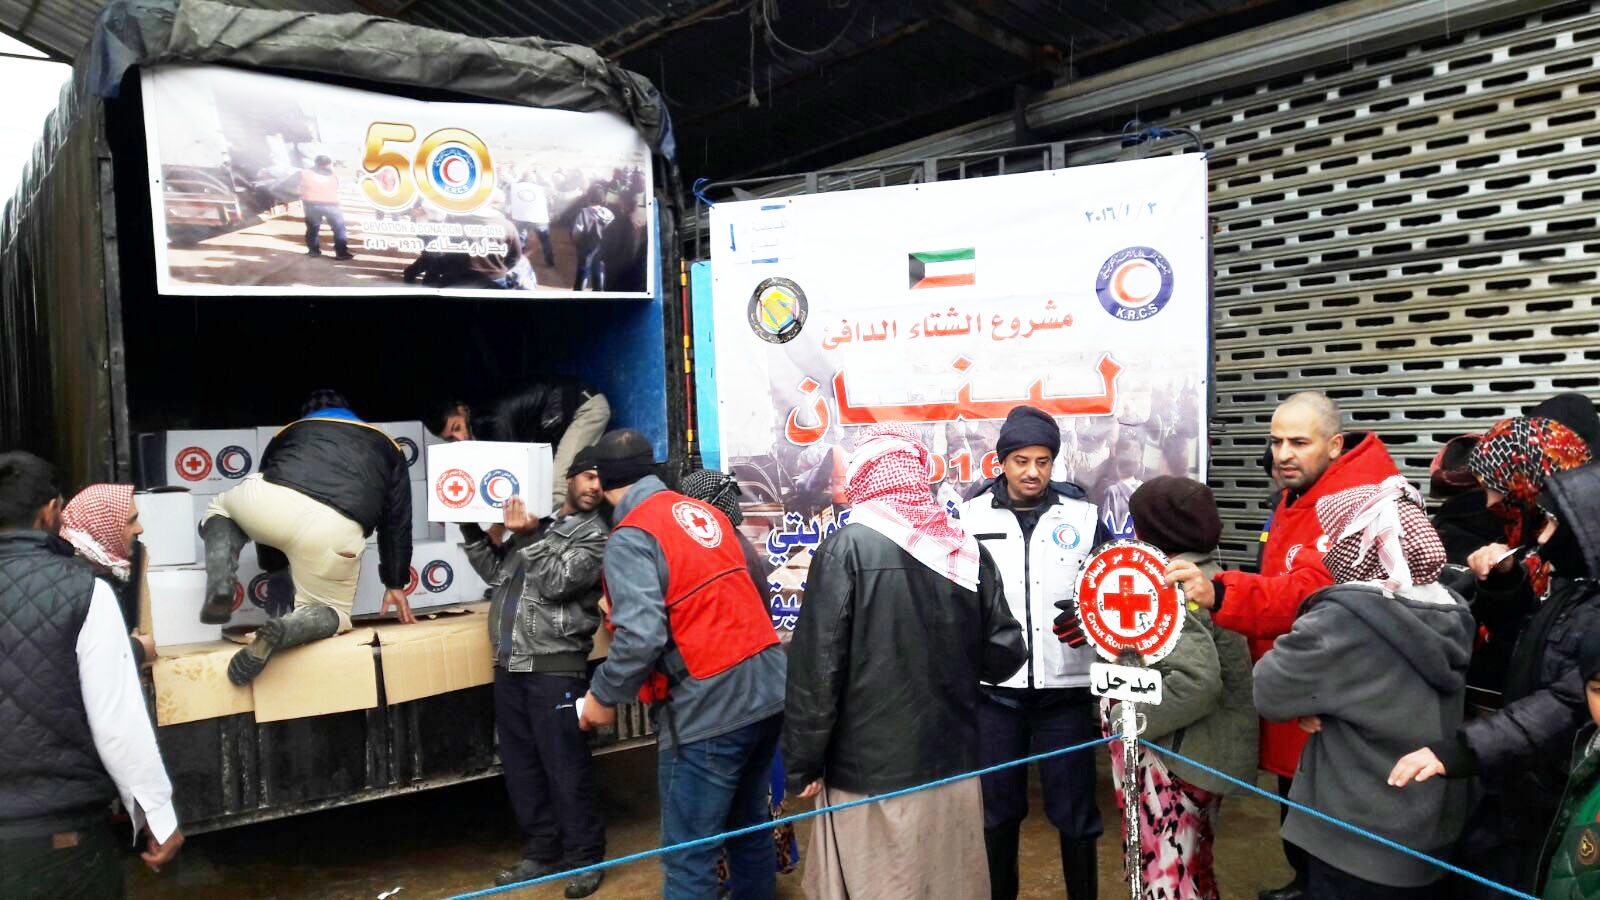 Kuwait Red Crescent Society (KRCS) delivers aid to Syrian refugee families in Lebanon